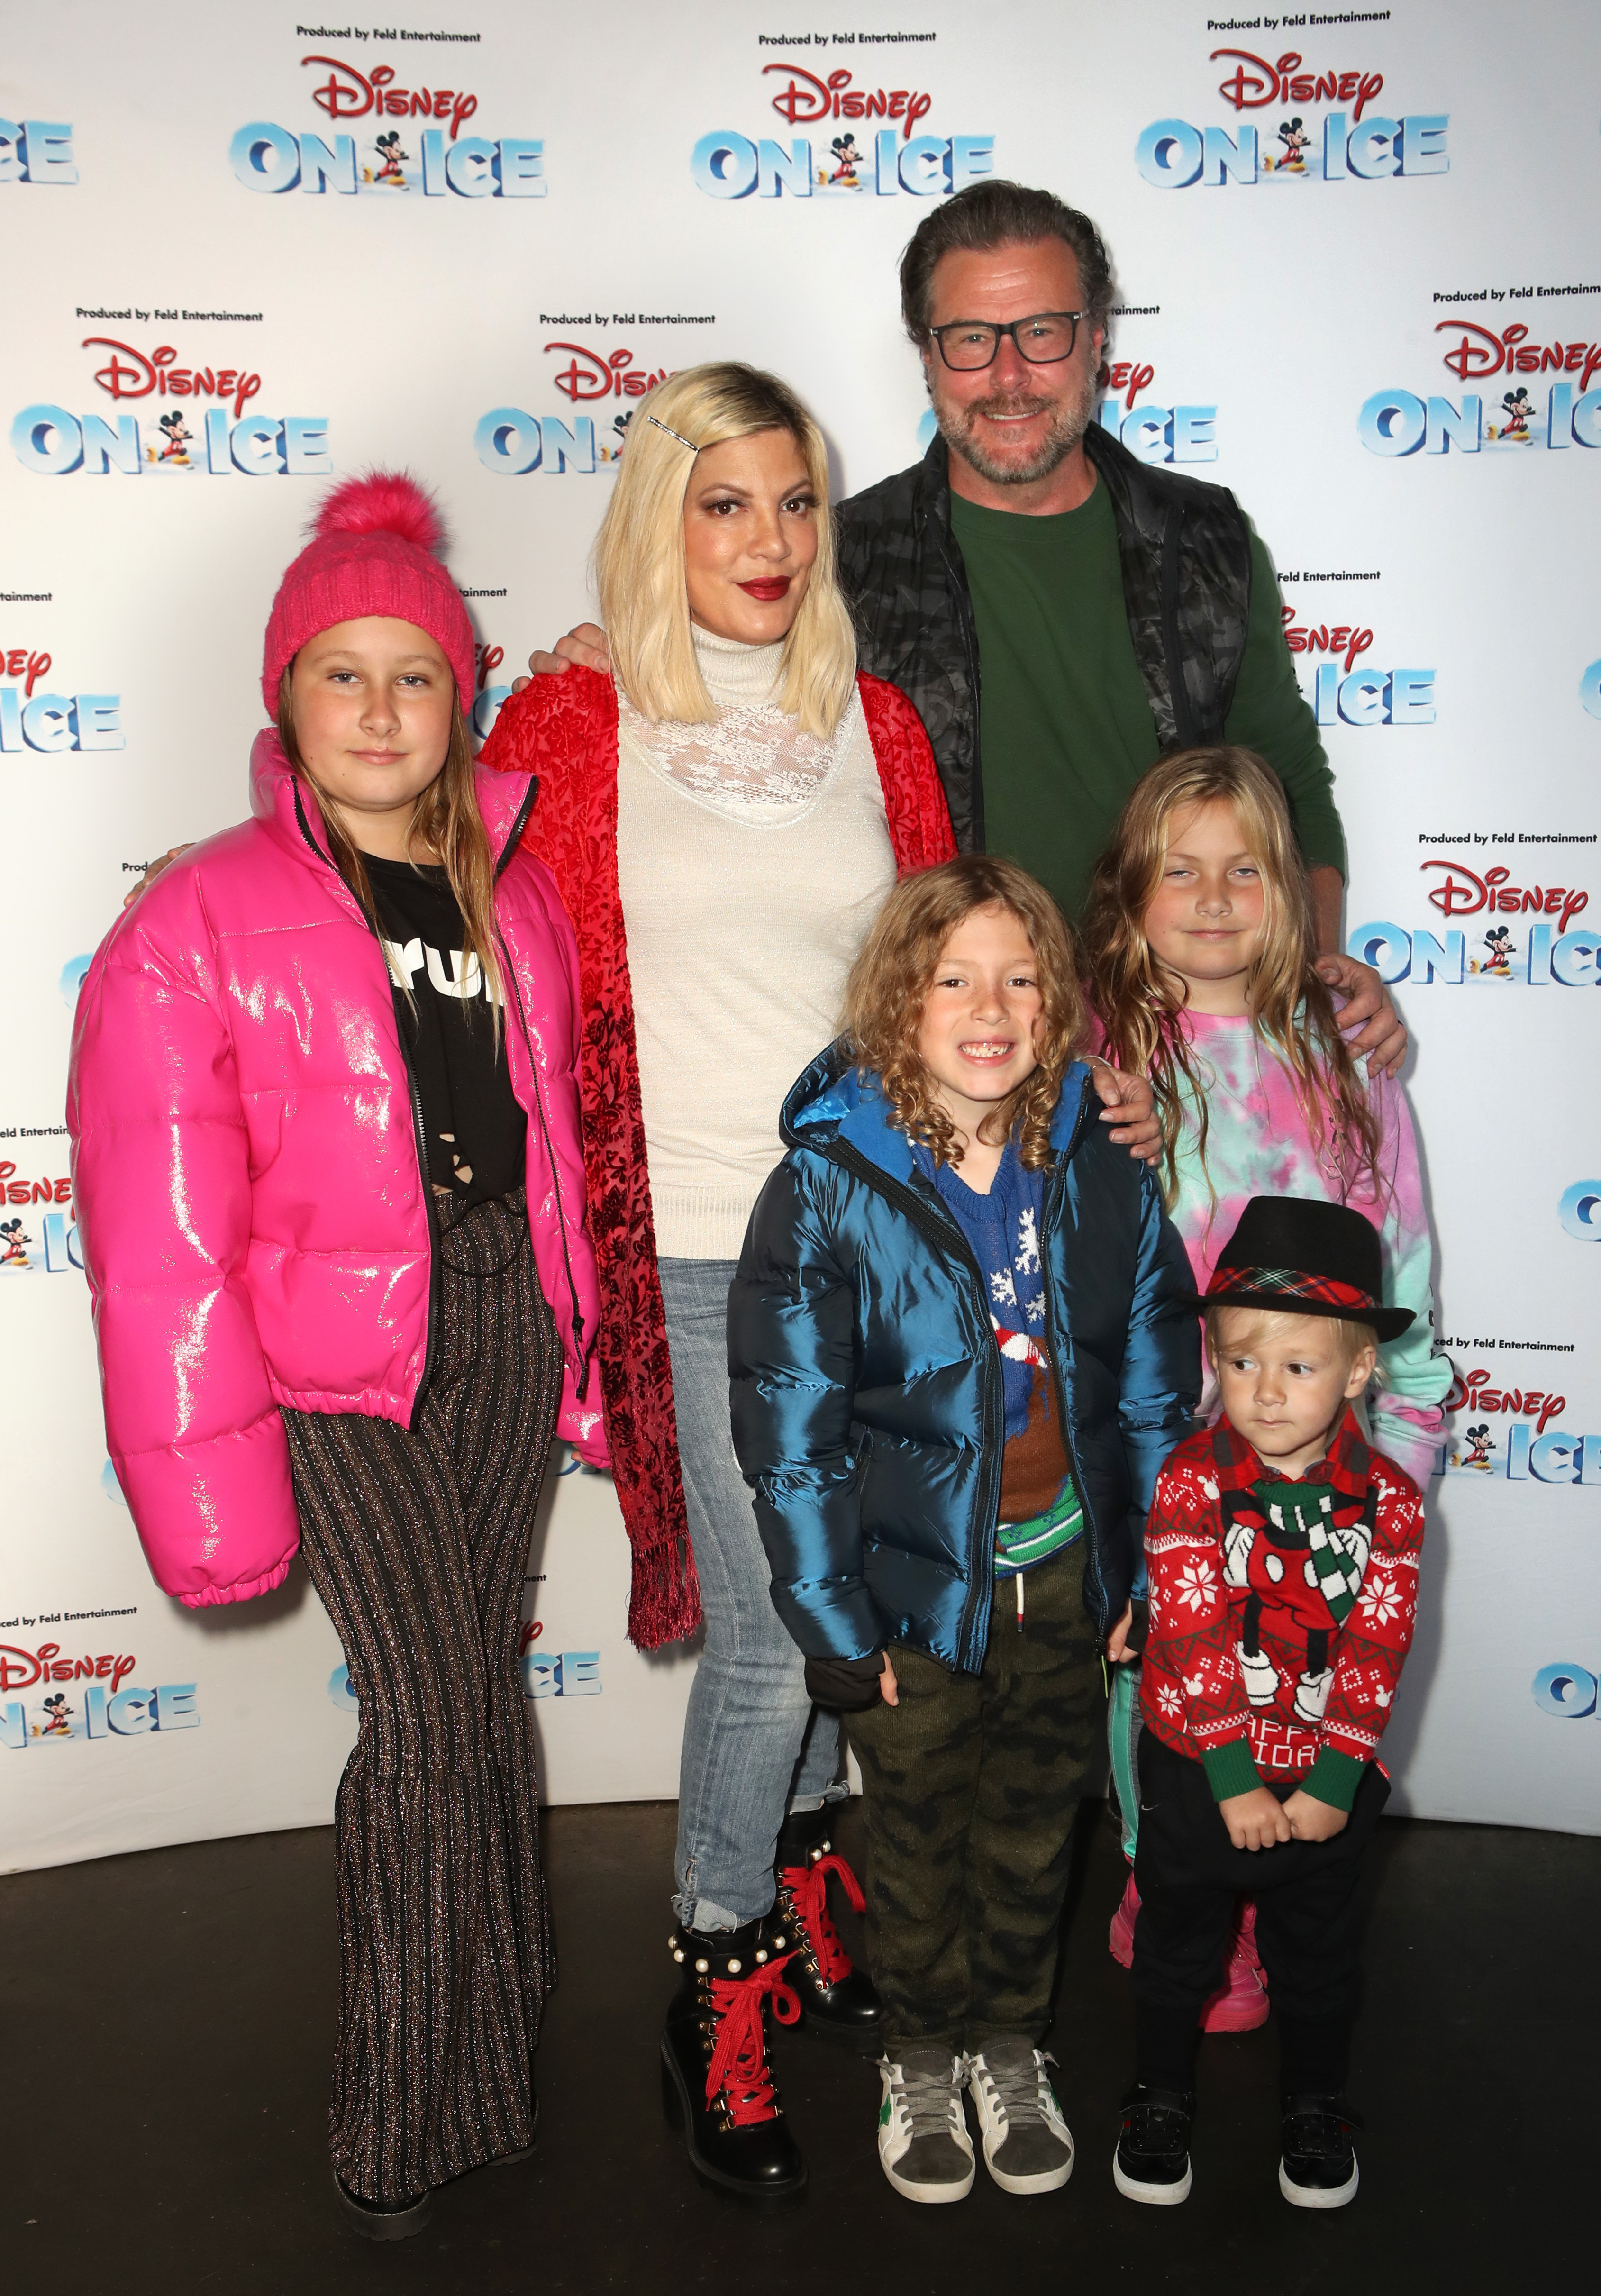 Tori Spelling and Dean McDermott with their kids Beau, Finn, Hattie, Stella, and Liam McDermott at the Disney On Ice Presents Mickey's Search Party Holiday Celebrity Skating Event in Los Angeles, California on December 13, 2019 | Source: Getty Images